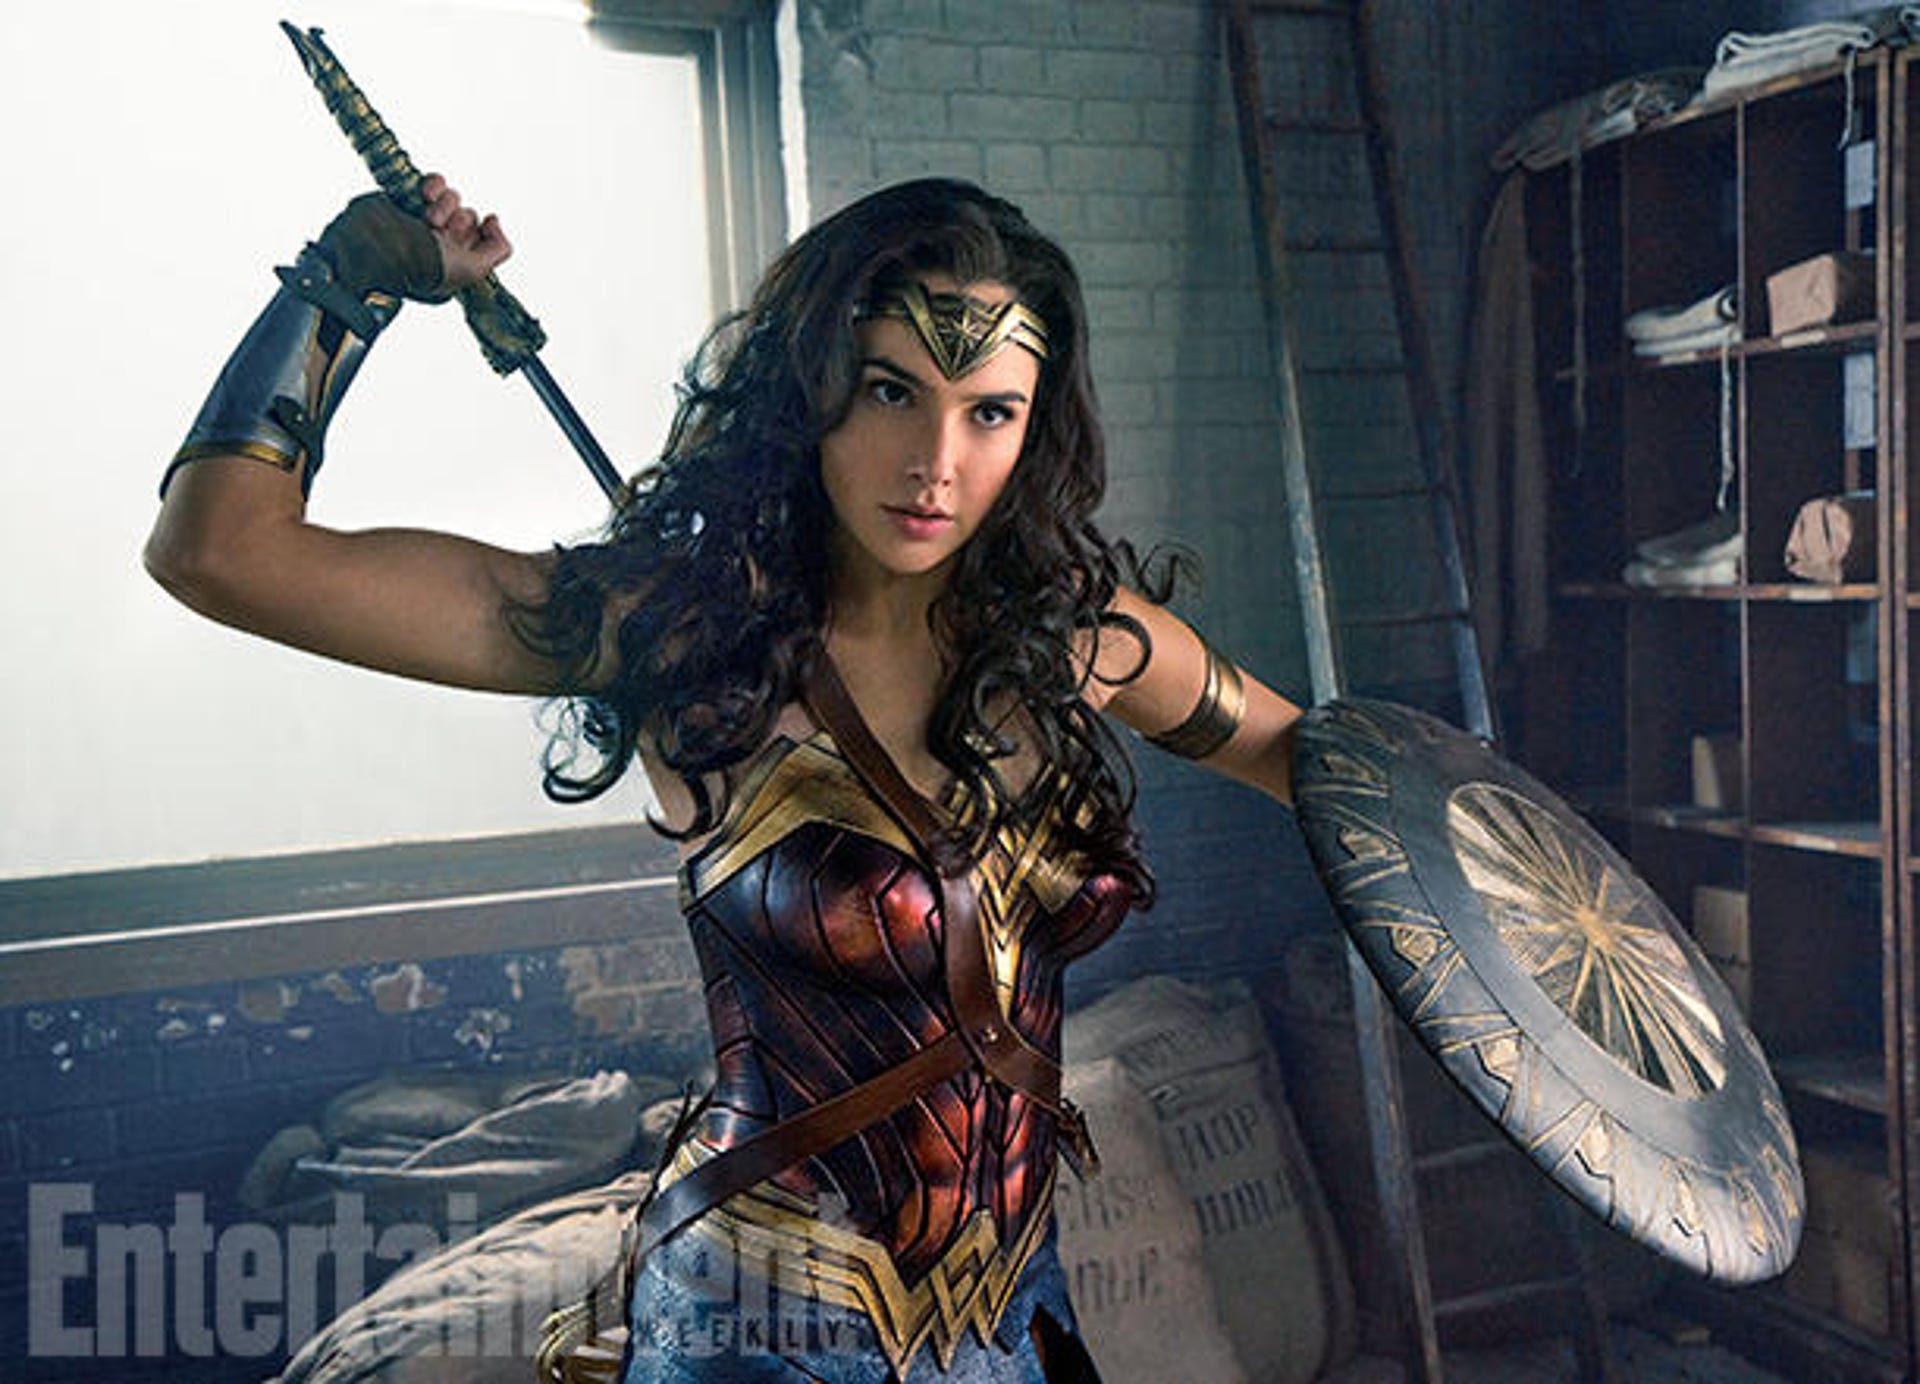 New 'Wonder Woman' images of Gal Gadot and Chris Pine revealed - CNET